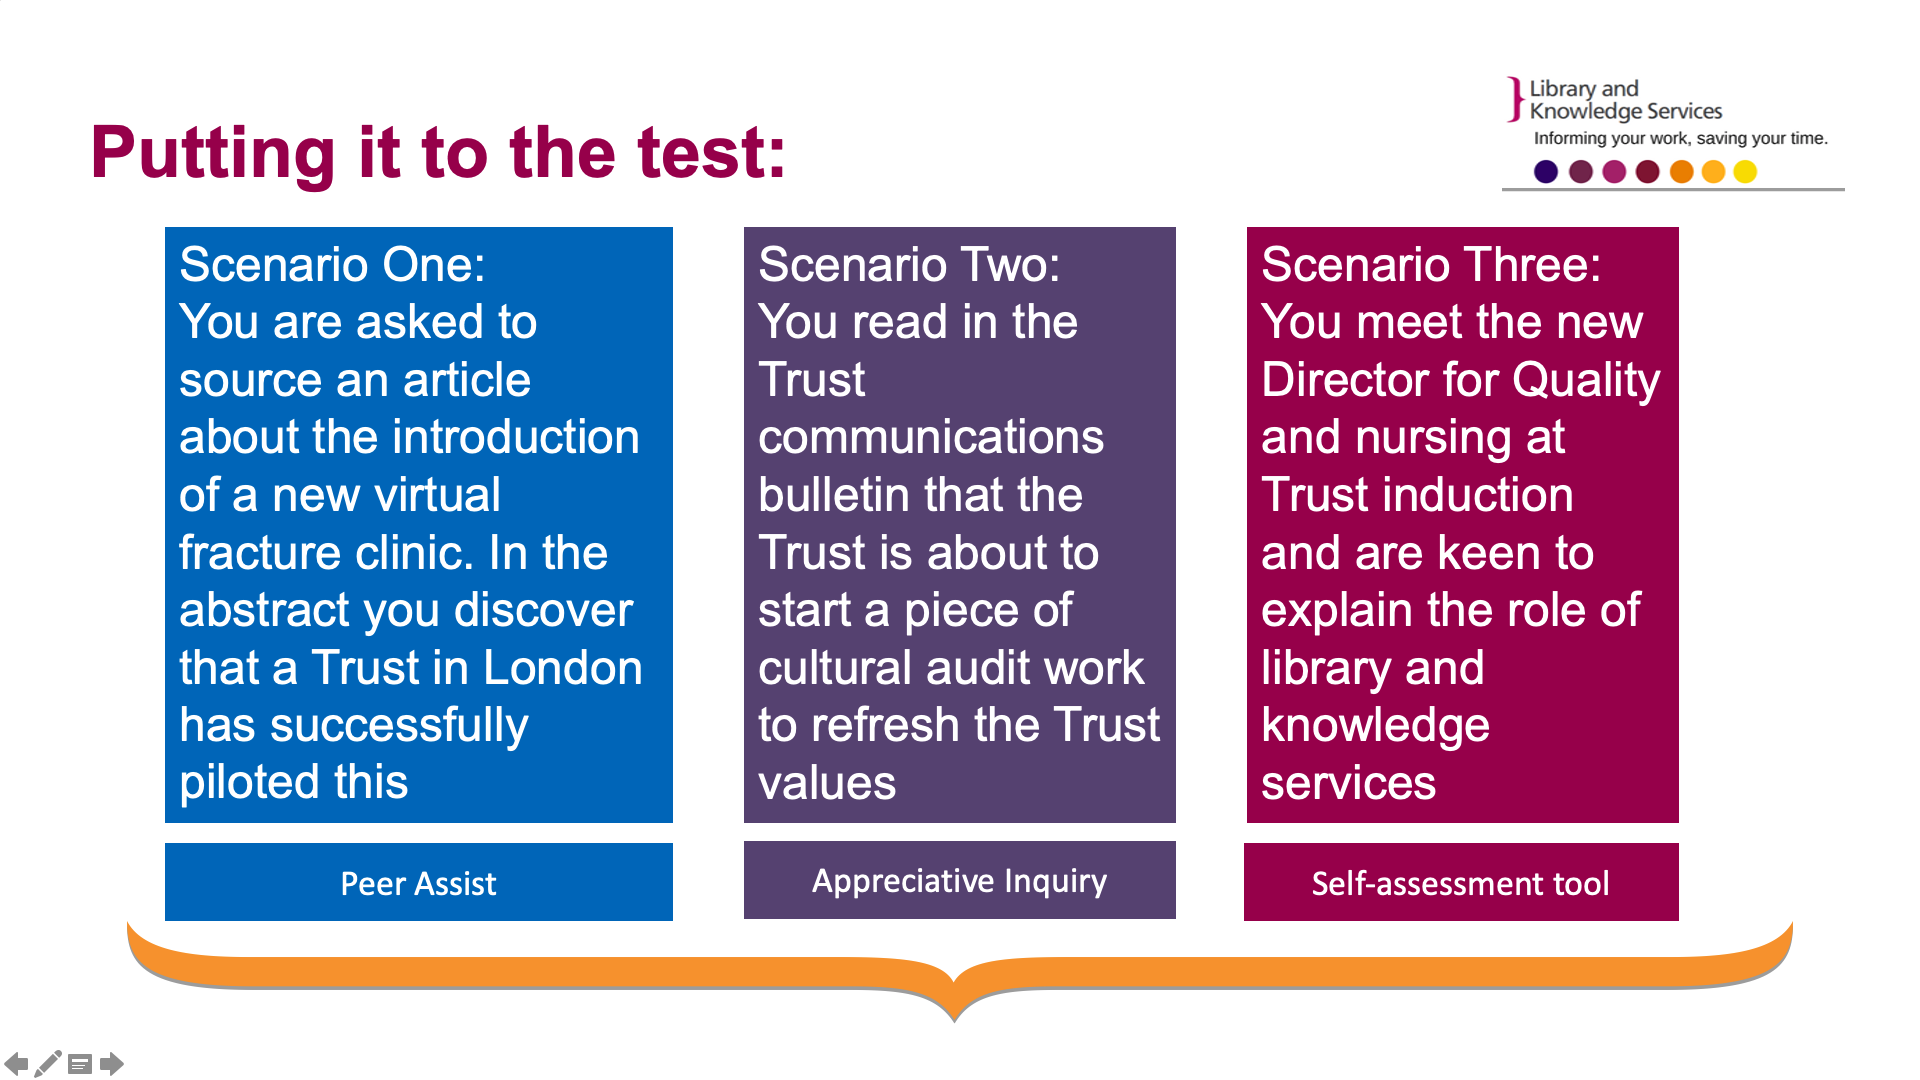 Slide 11: Three scenarios are presented. Scenario one is labelled peer assist. The scenario is: You are asked to source an article about the introduction of a new virtual fracture clinic. In the abstract you discover that a Trust in London has successfully piloted this. Scenario 2 is labelled appreciative enquiry. The scenario is: You read in the Trust communications bulletin that the Trust is about to start a piece of cultural audit work to refresh the Trust values. Scenario 3 is labelled 'self assessment tool'. The scenario is: You meet the new Director for Quality and nursing at Trust induction and are keen to explain the role of library and knowledge services.